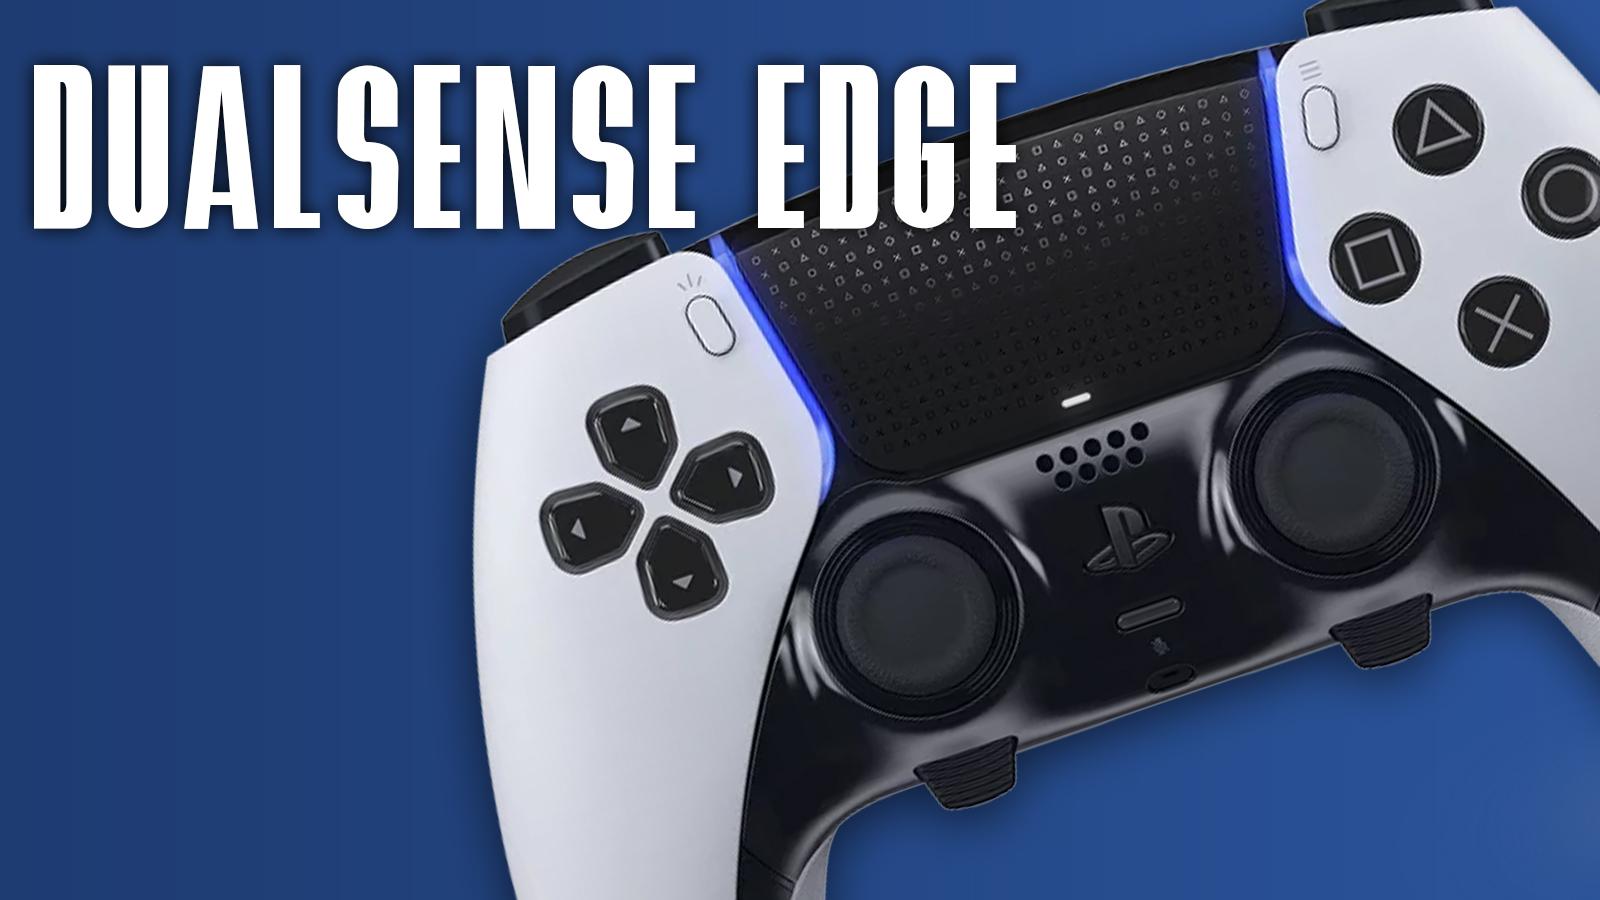 How to Use a PS5 DualSense Edge Controller on a PC